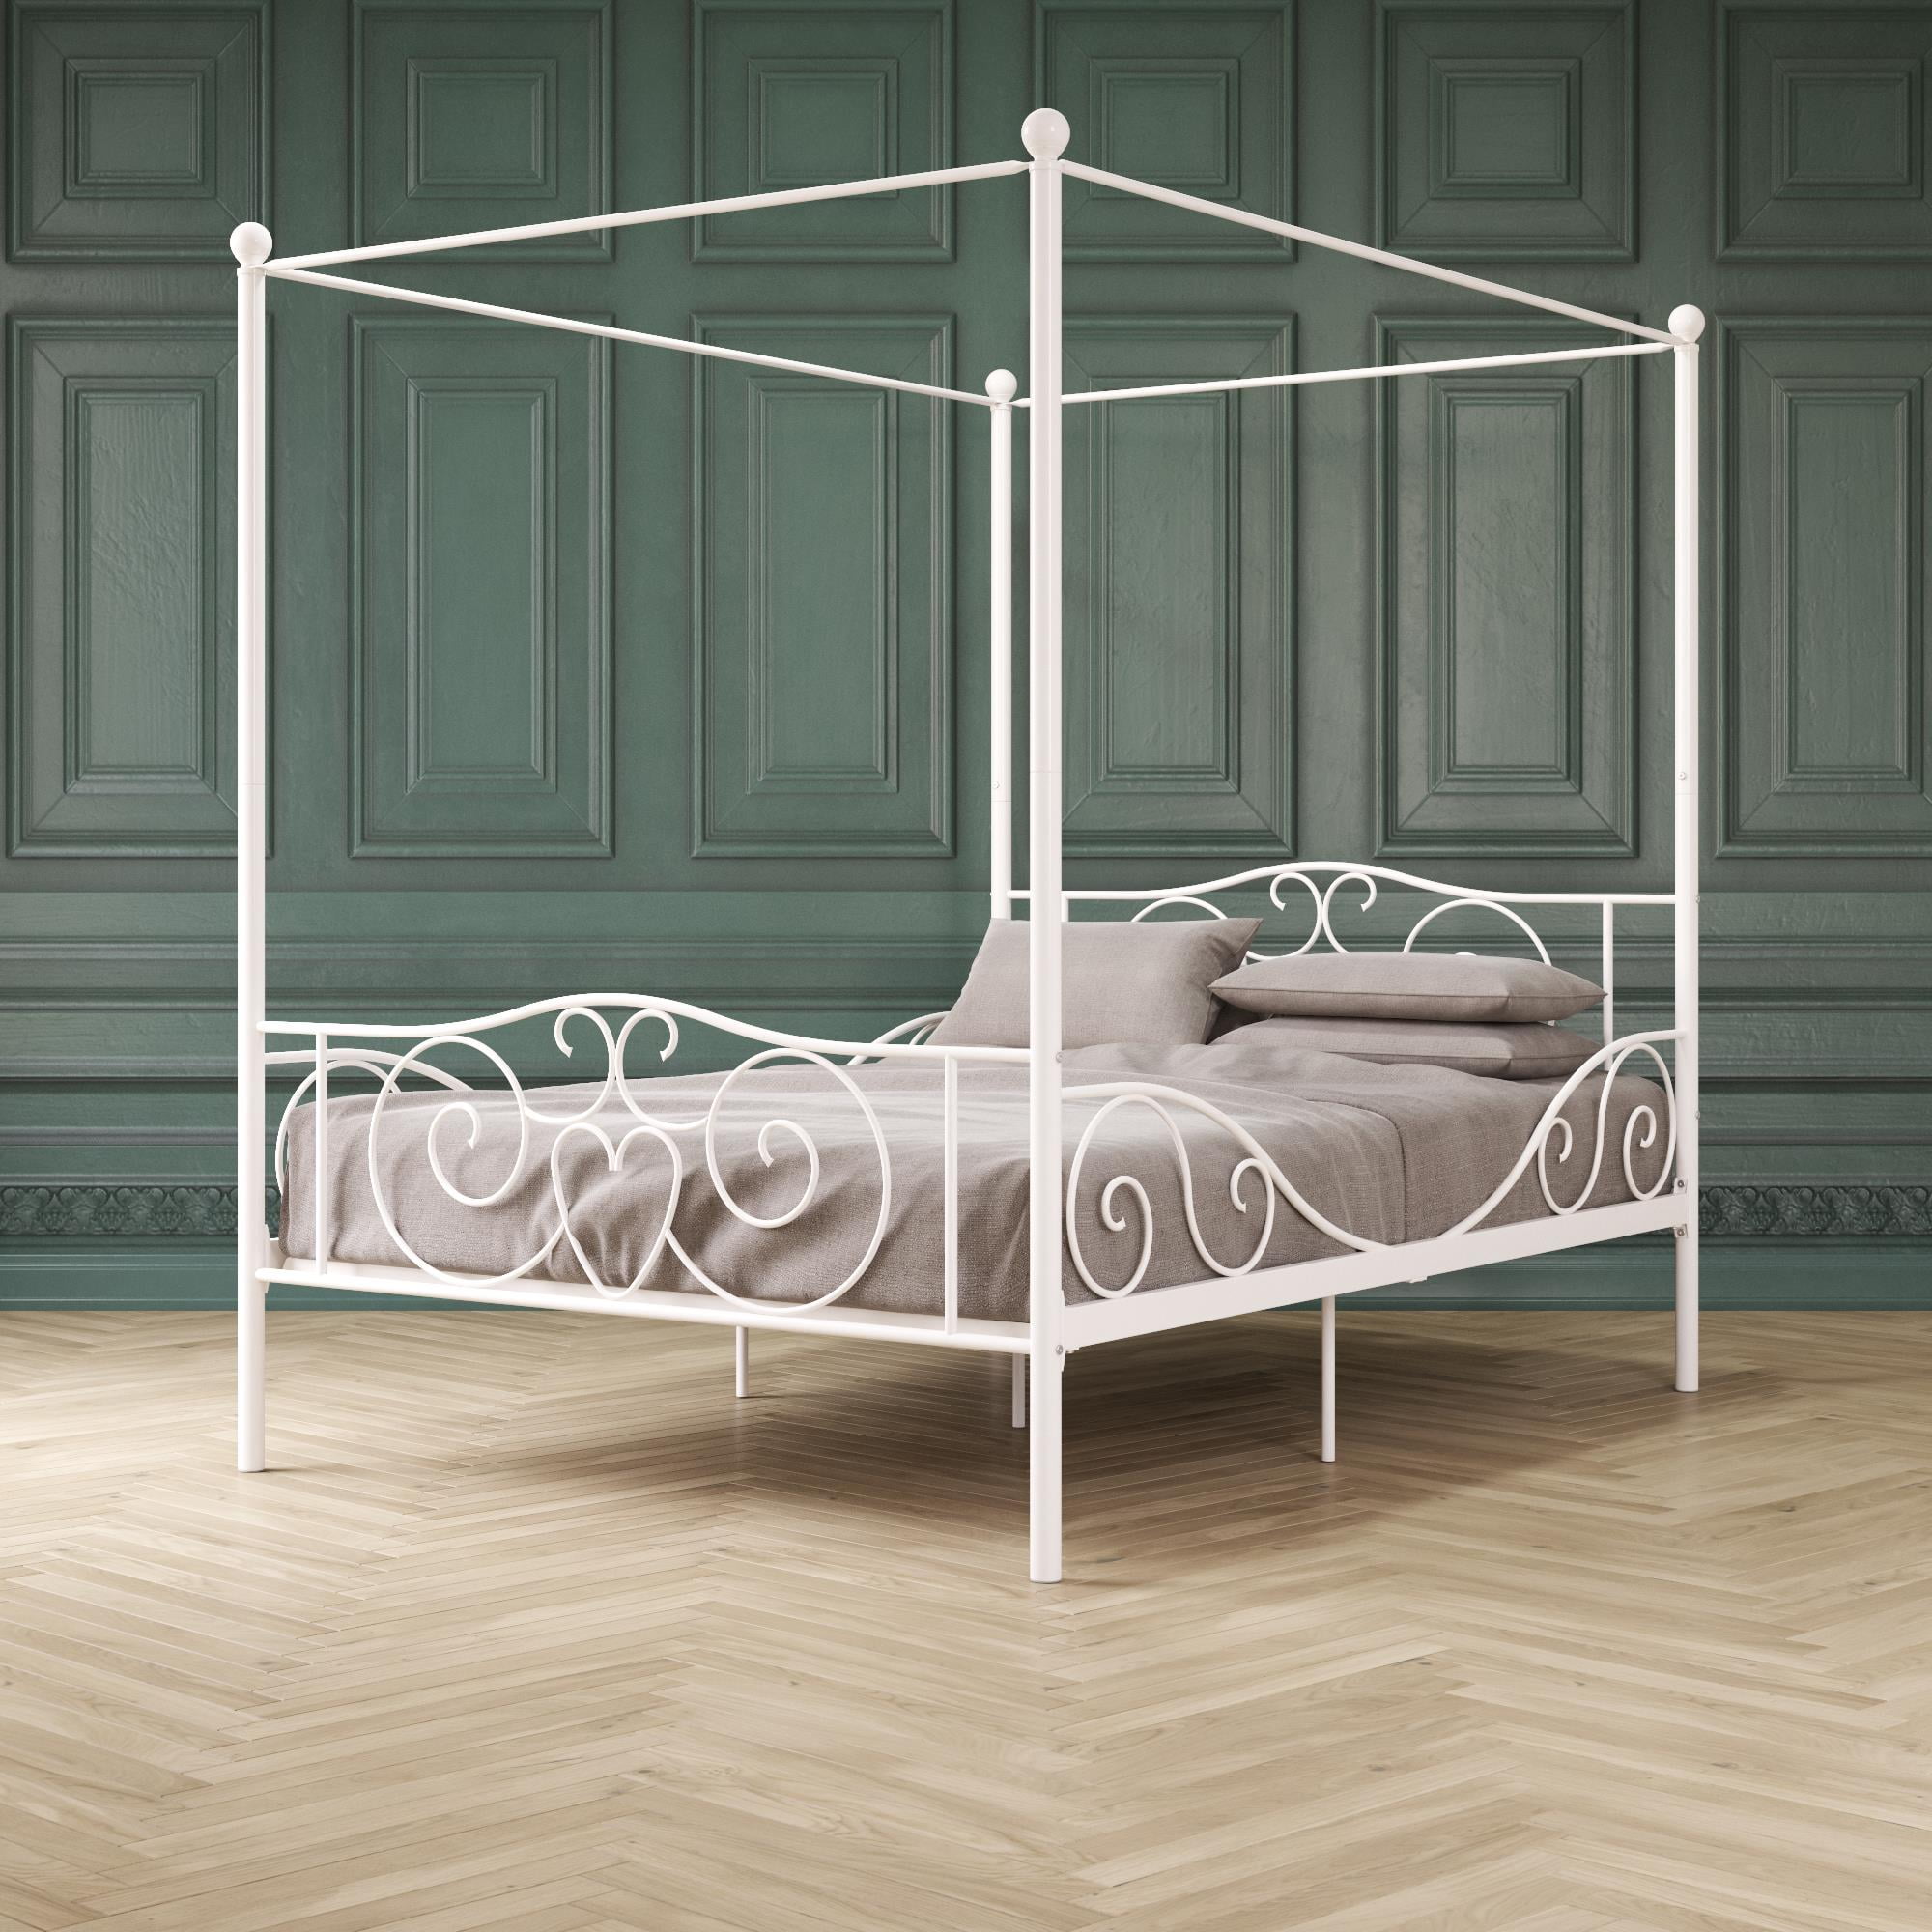 Elm Oak Canopy Metal Bed Full Size, Iron Canopy Bed Frame